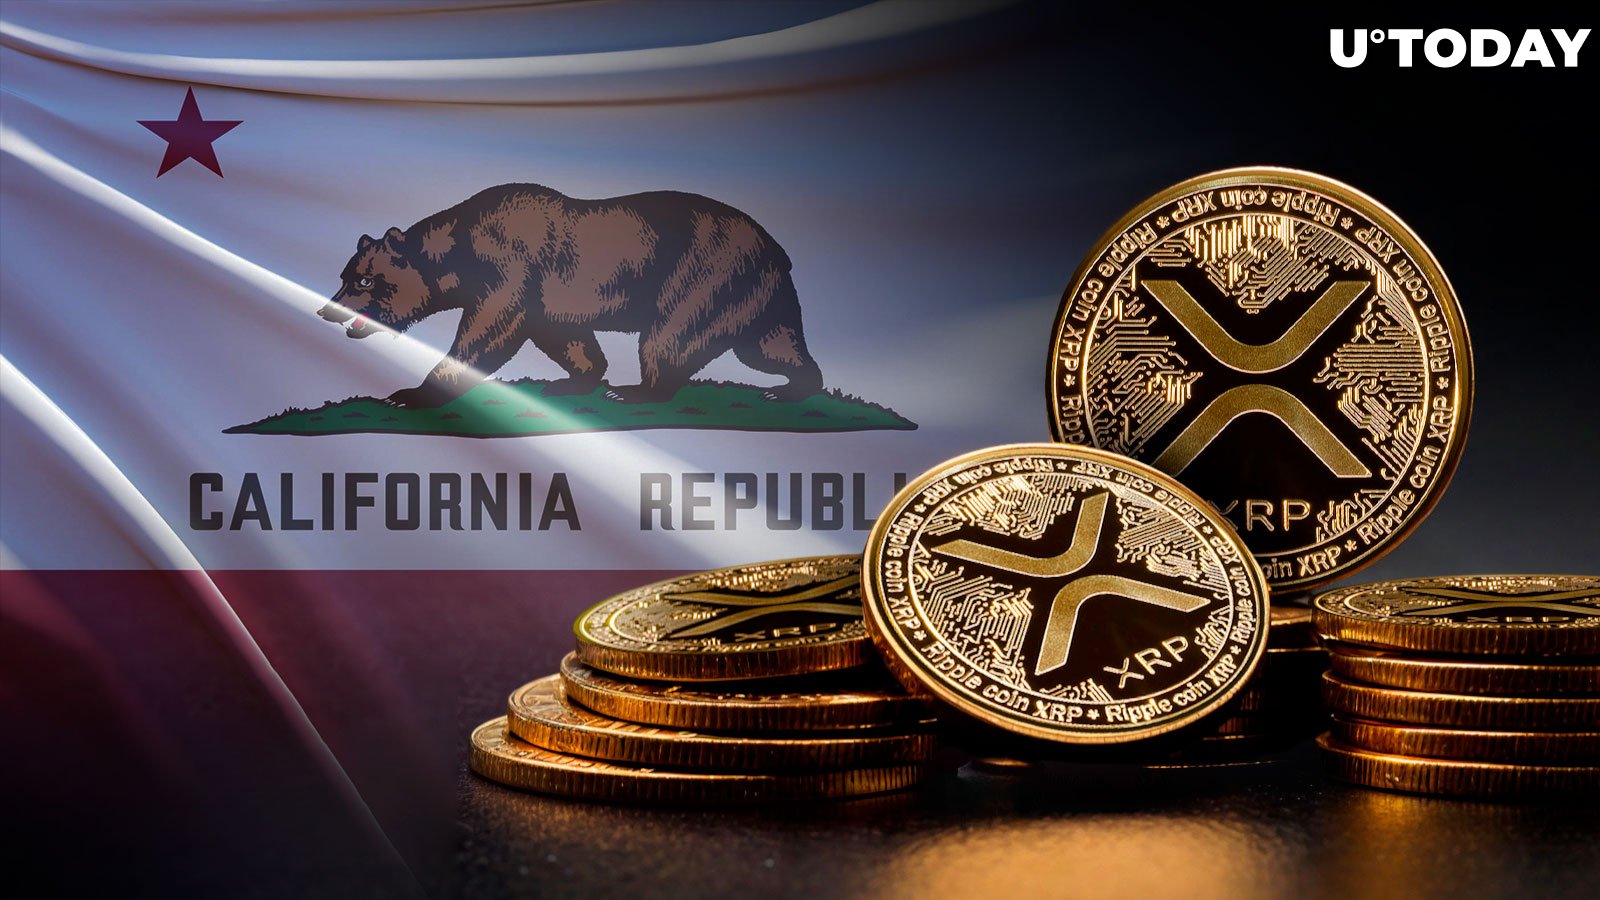 XRP on Track to Be Security in California 